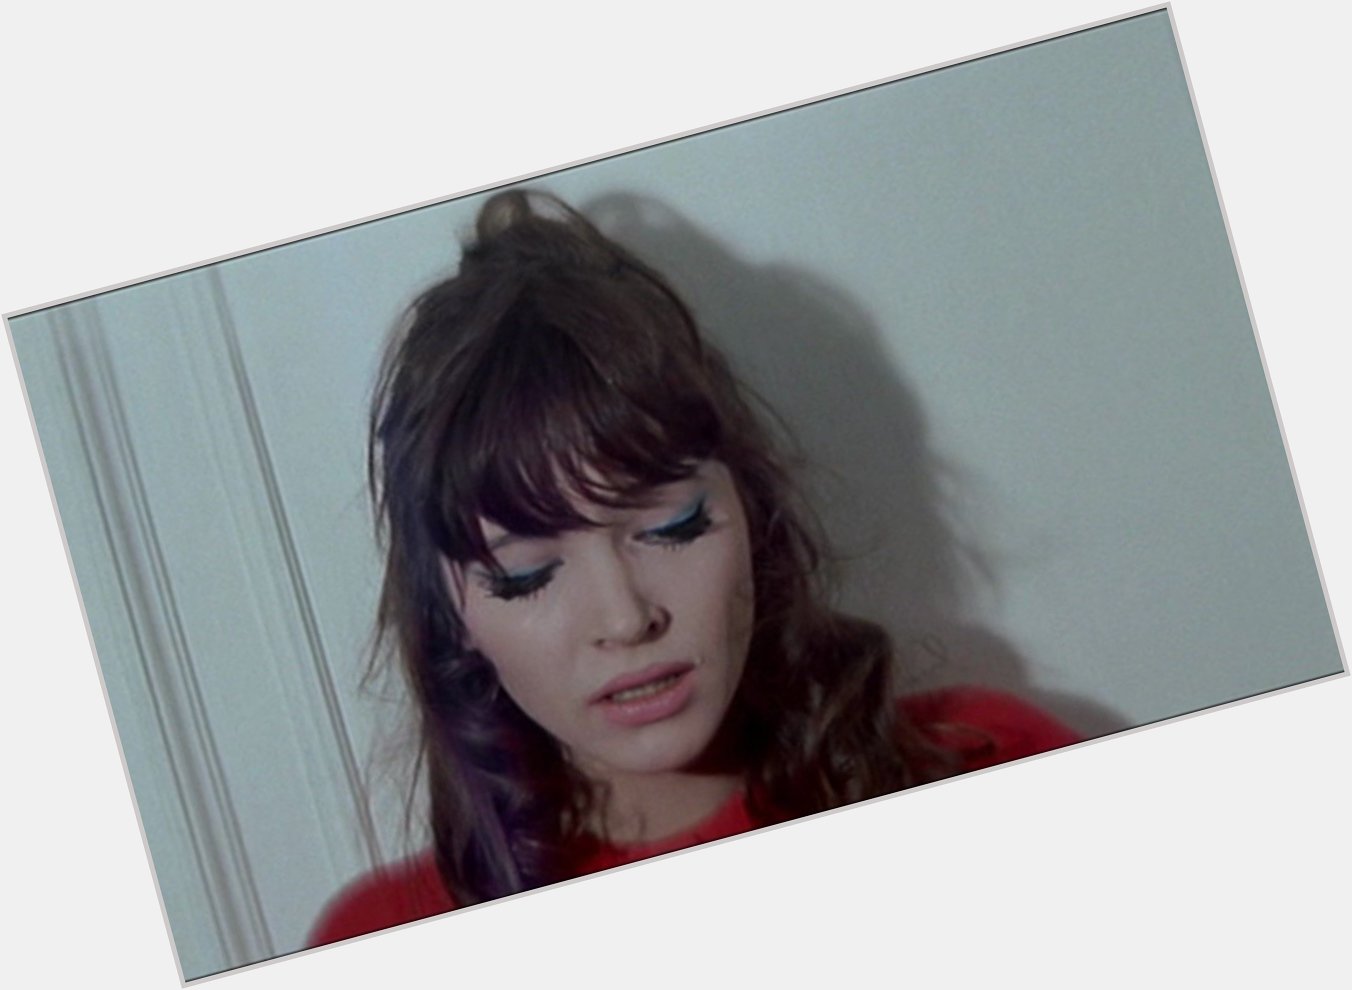 Happy birthday miss anna karina my biggest style inspo & queen of crying miss you deeply 